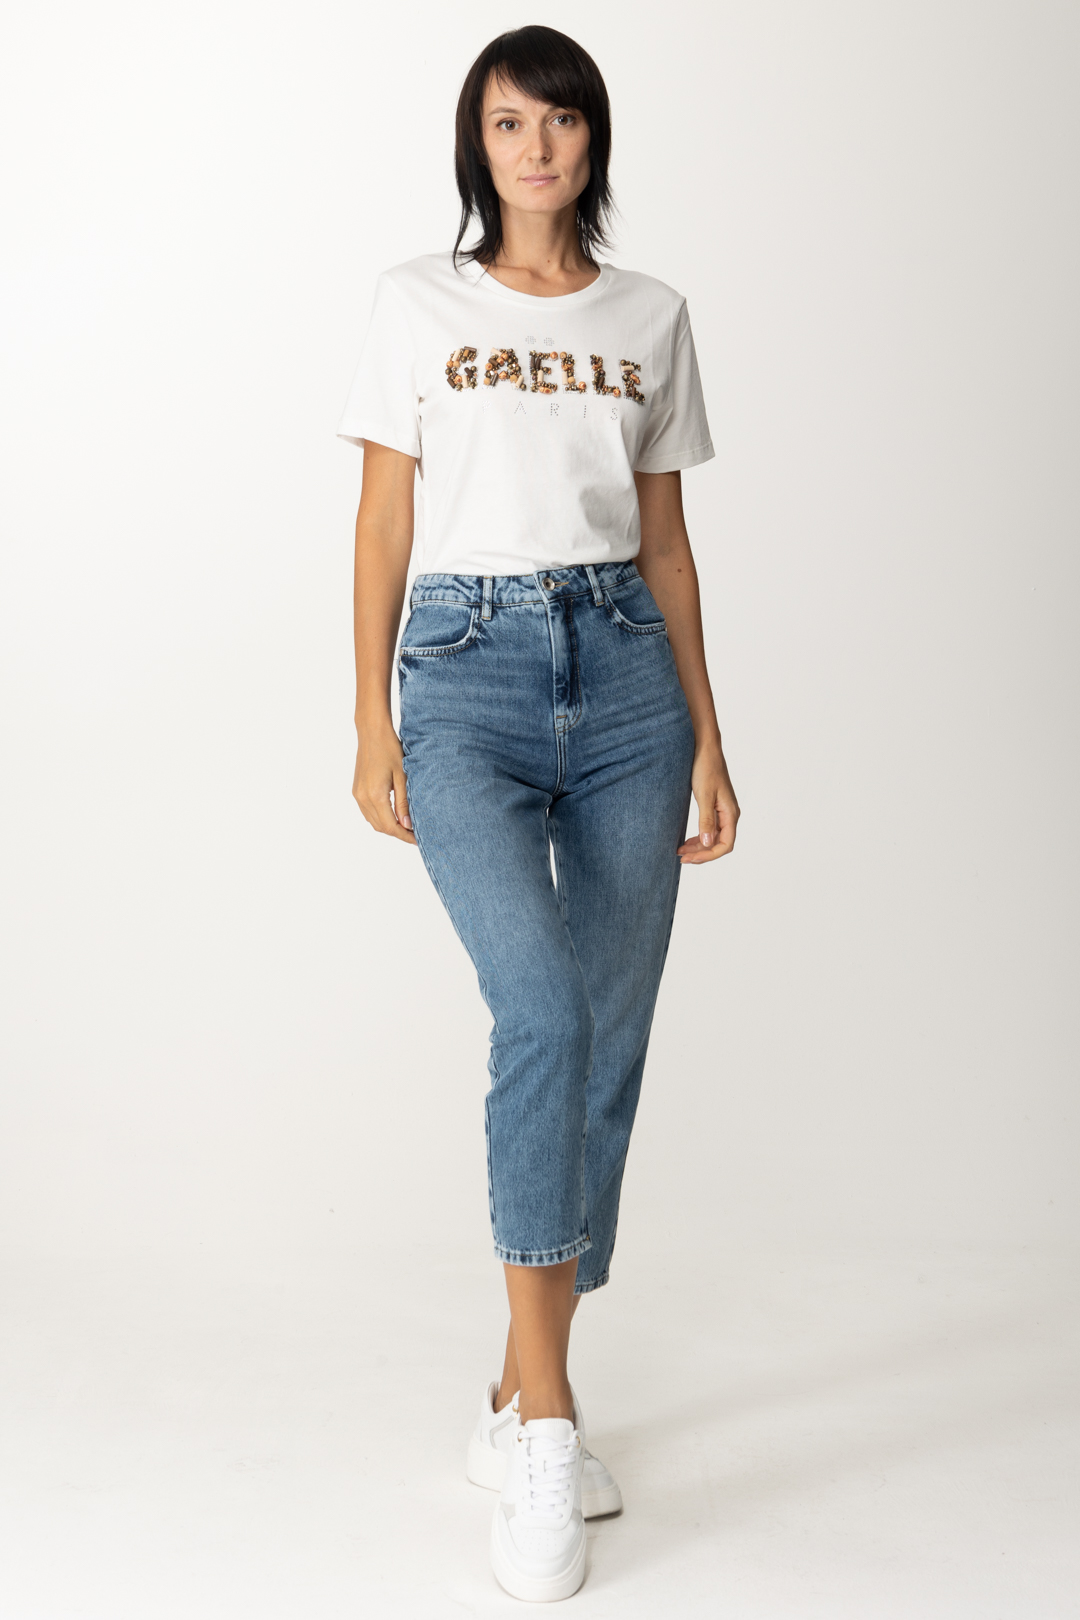 Preview: Gaelle Paris T-shirt with embroidered logo Offwhite